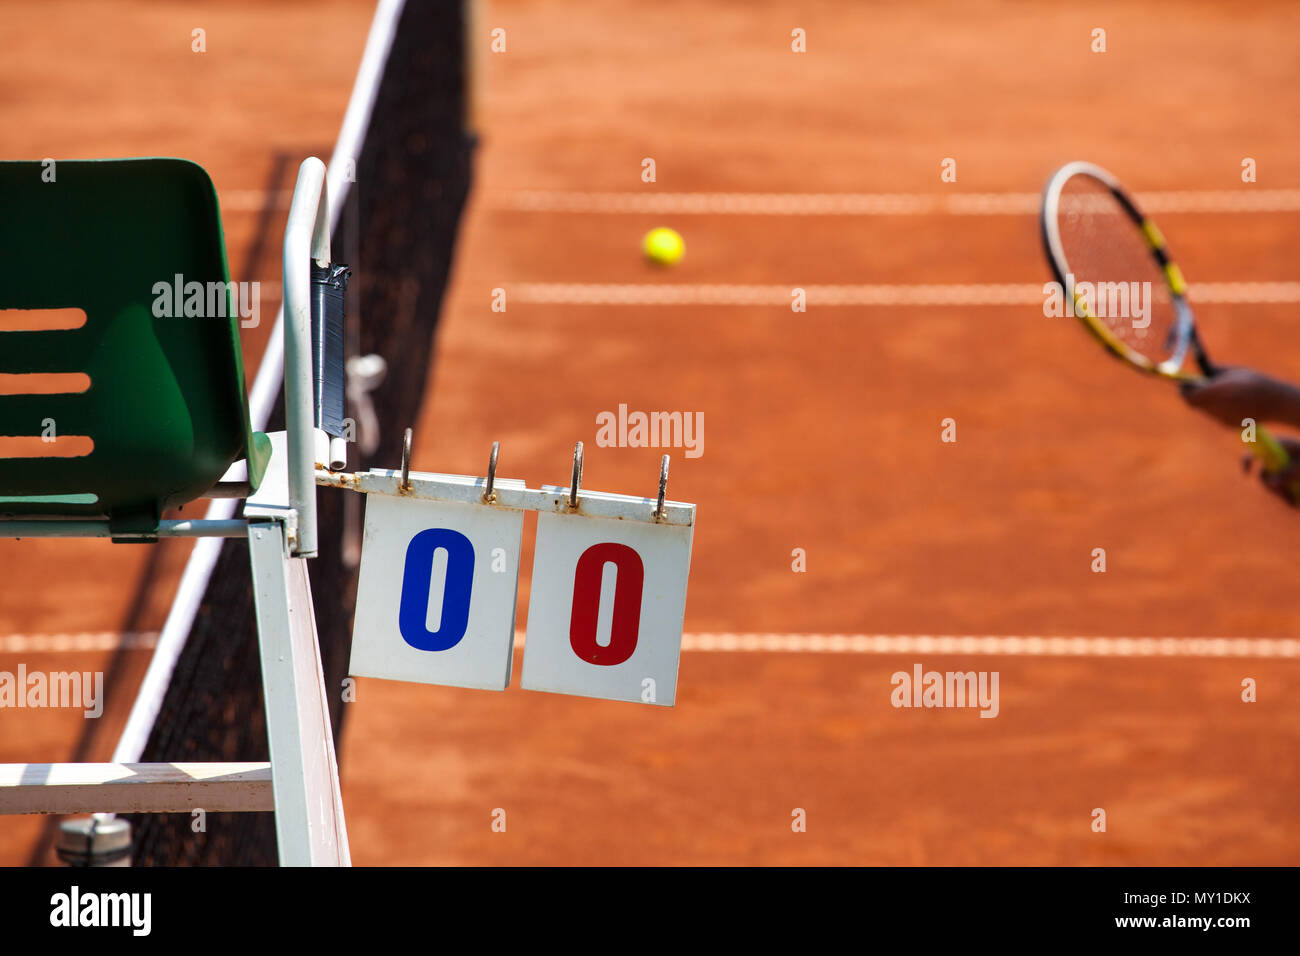 Tennis player umpire chair with scoreboard and racket on a clay court in the beginning of the game. Stock Photo